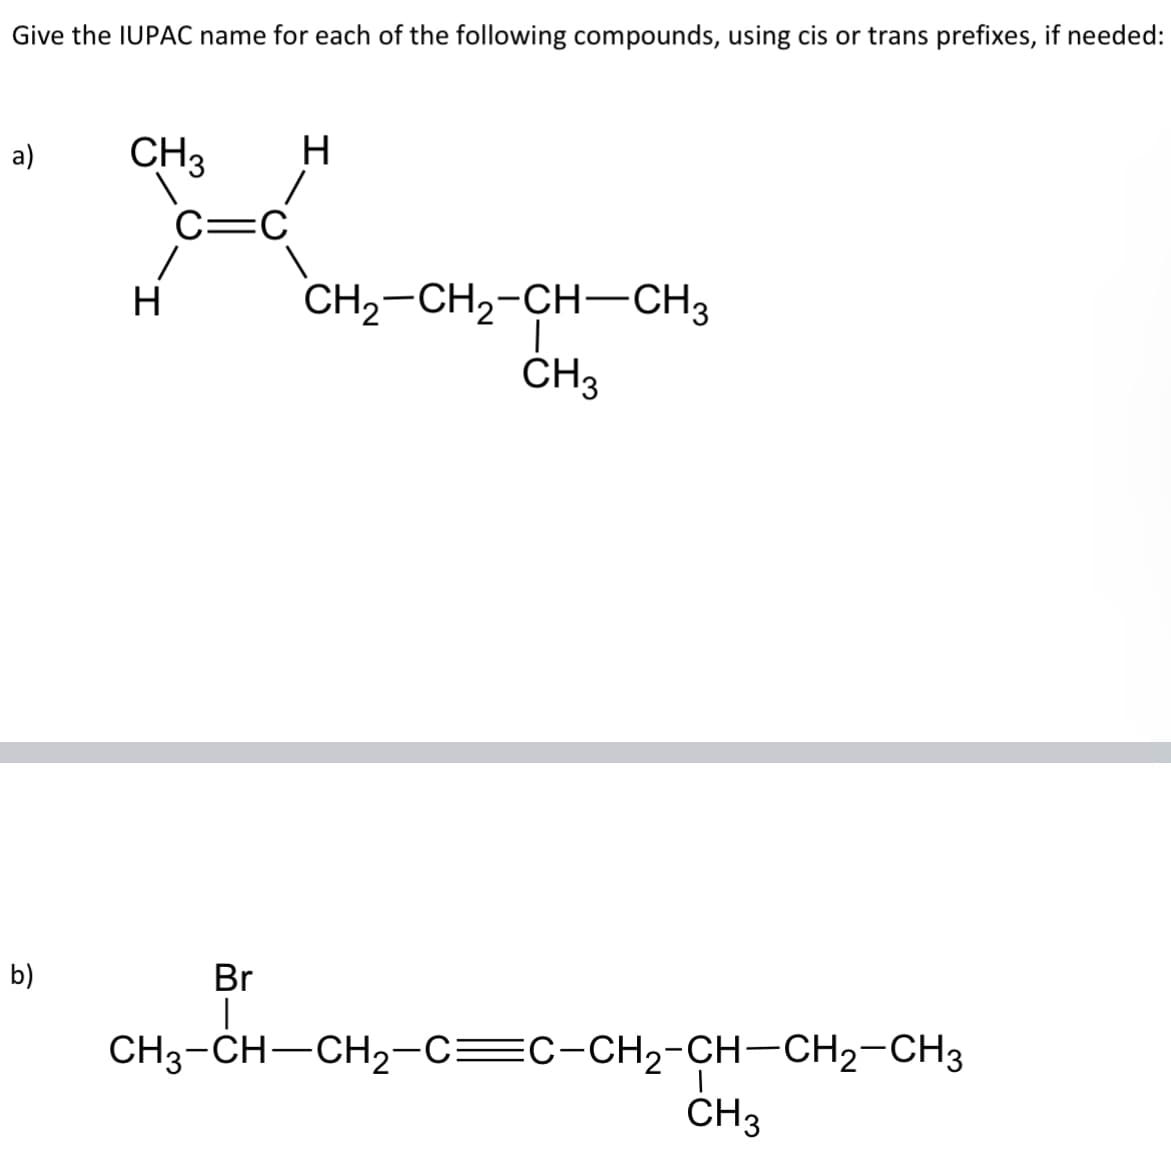 Give the IUPAC name for each of the following compounds, using cis or trans prefixes, if needed:
a)
b)
CH3
H
C= C
H CH2–CH2-CH=CH3
CH3
Br
|
CH3-CH—CH2₂-C=C-CH₂-CH-CH₂-CH3
CH3